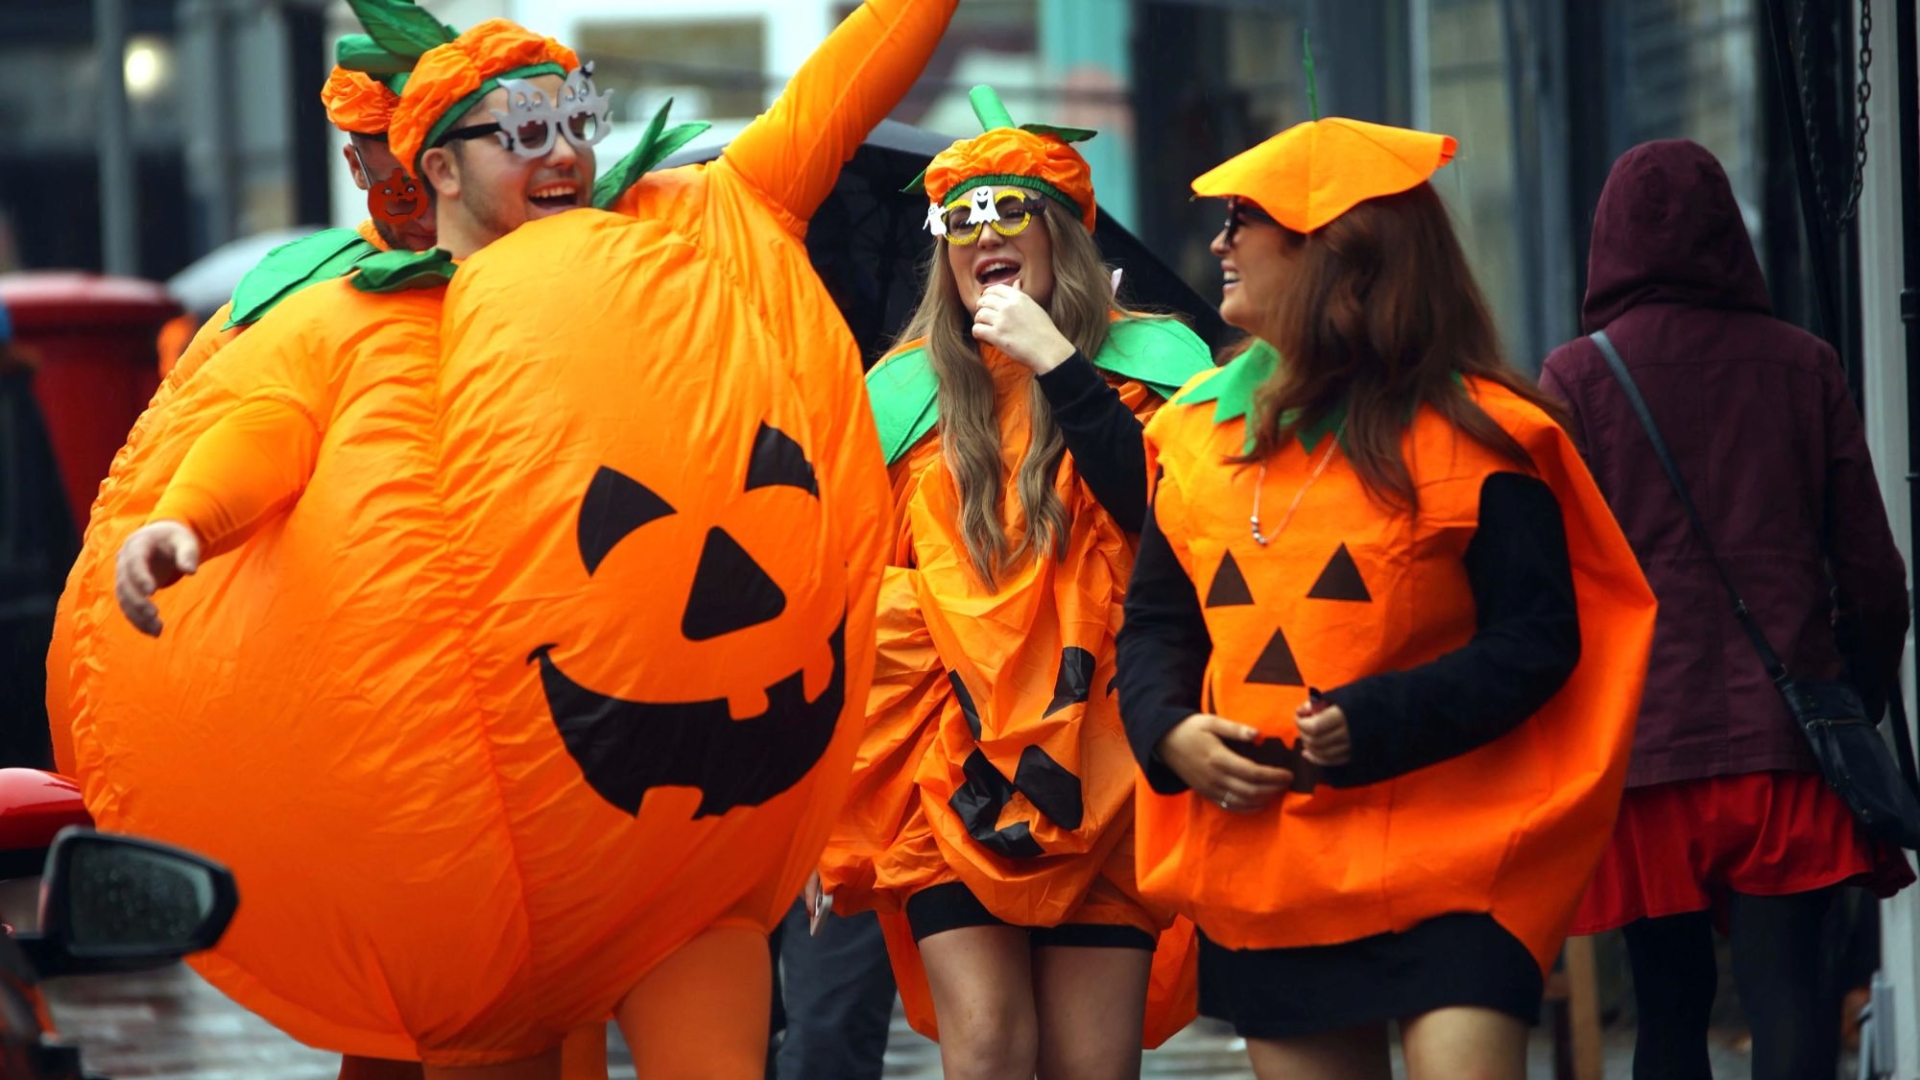 The fun-loving Brits parade through the streets in devilish costumes to celebrate Halloween